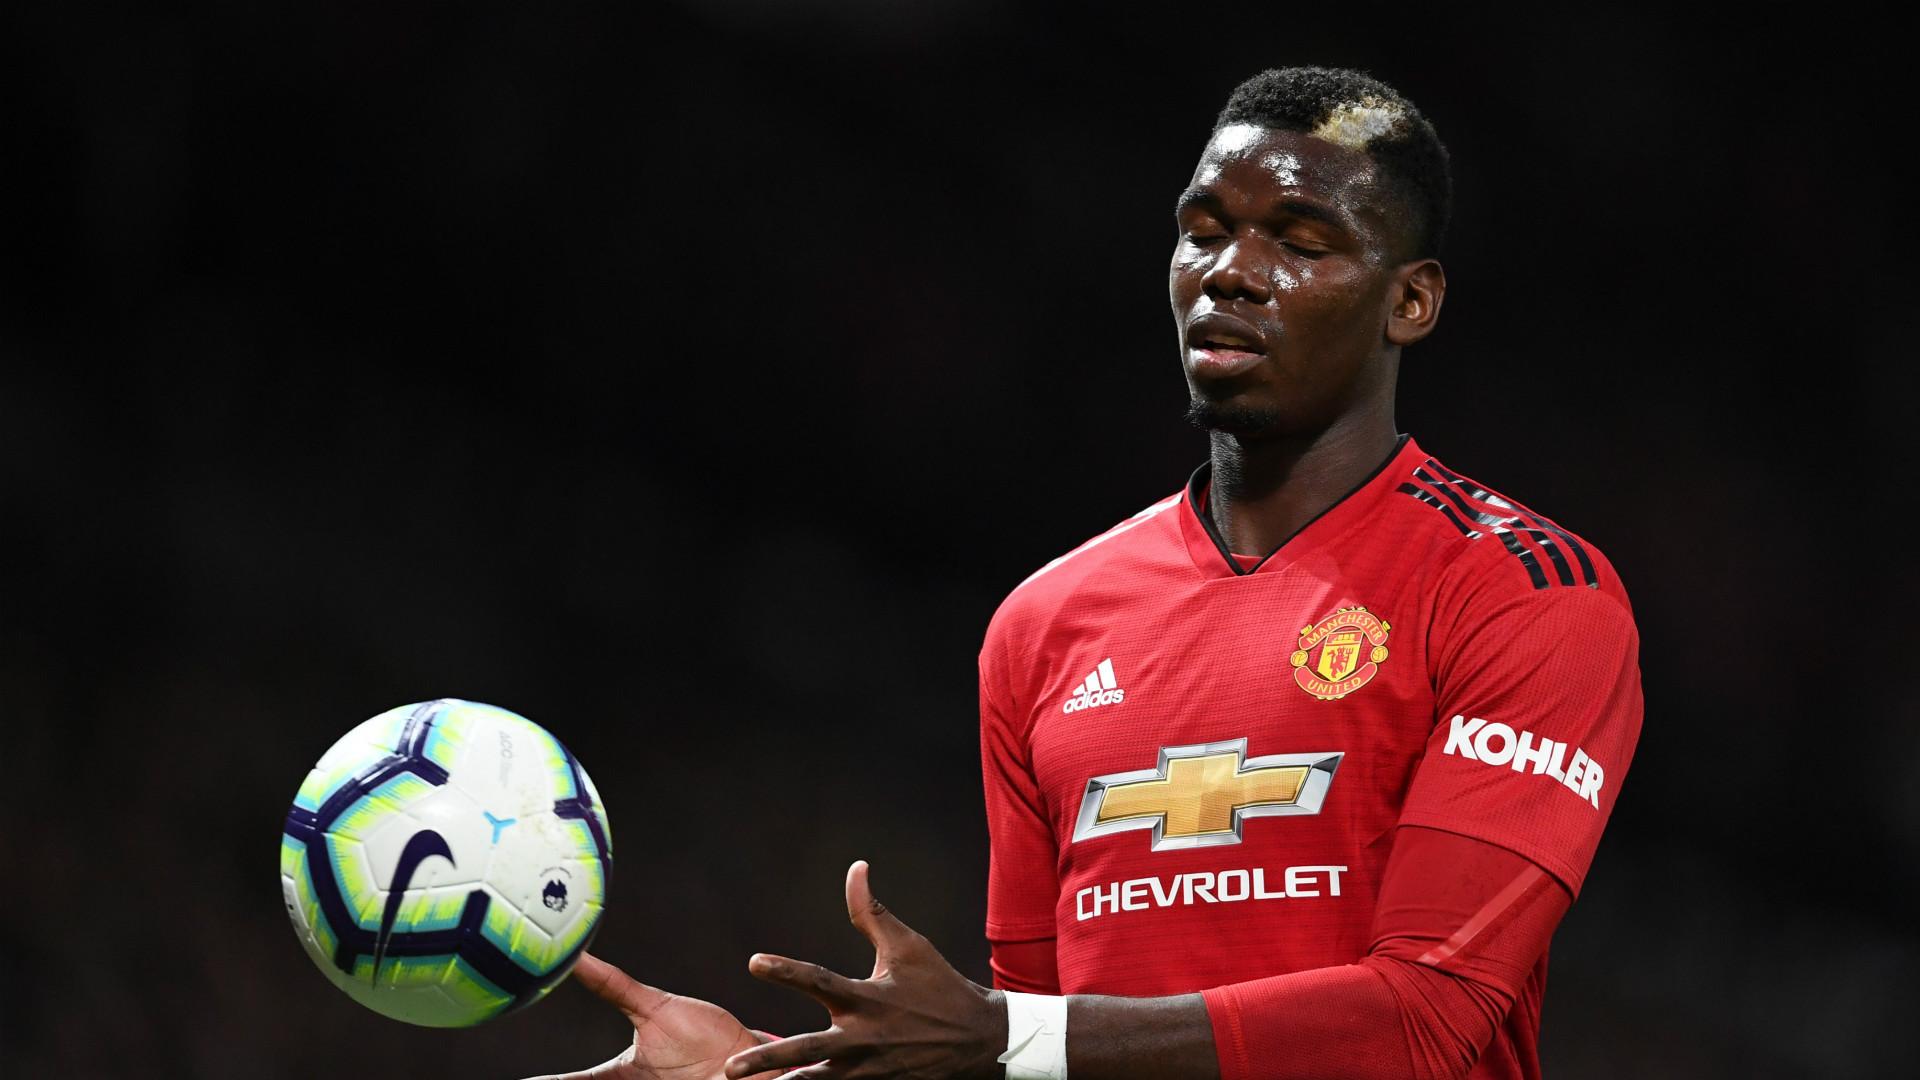 Paul Pogba: One of the GOATs for France, a scapegoat for Manchester